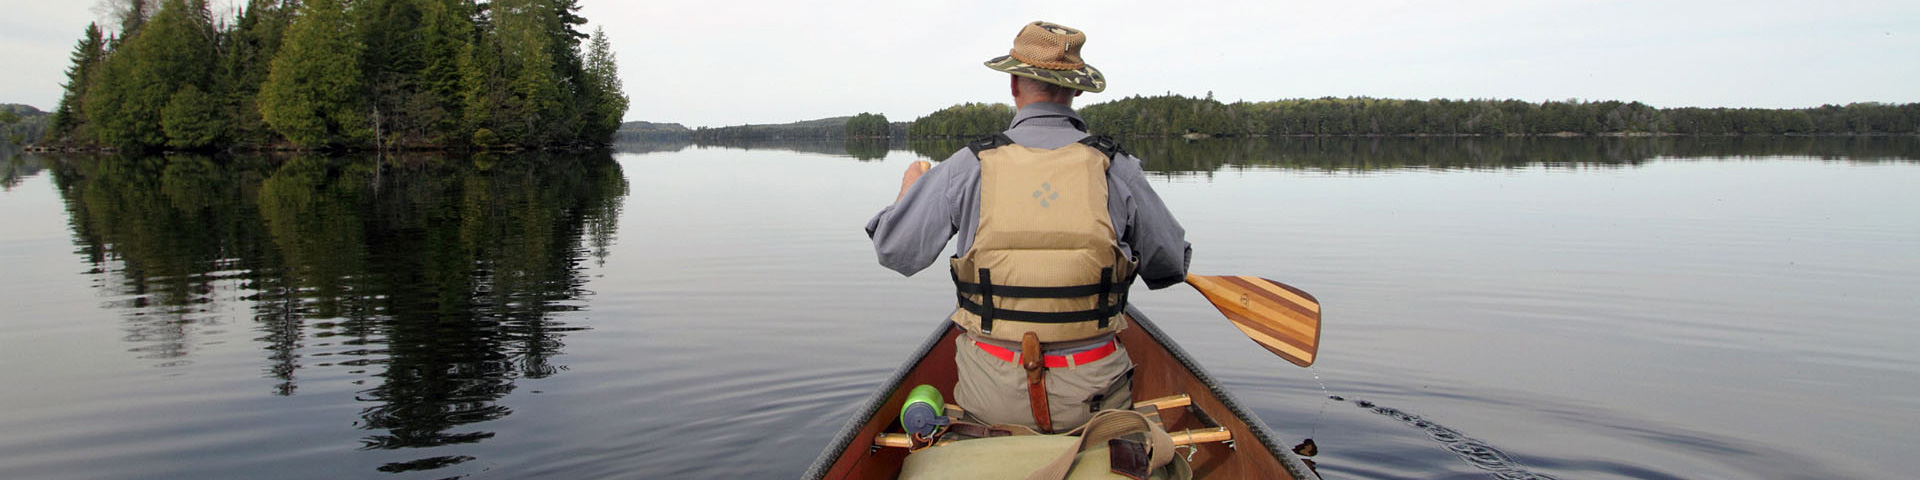 Deluxe Canoe Trip Package by Algonquin Outfitters - Image 11